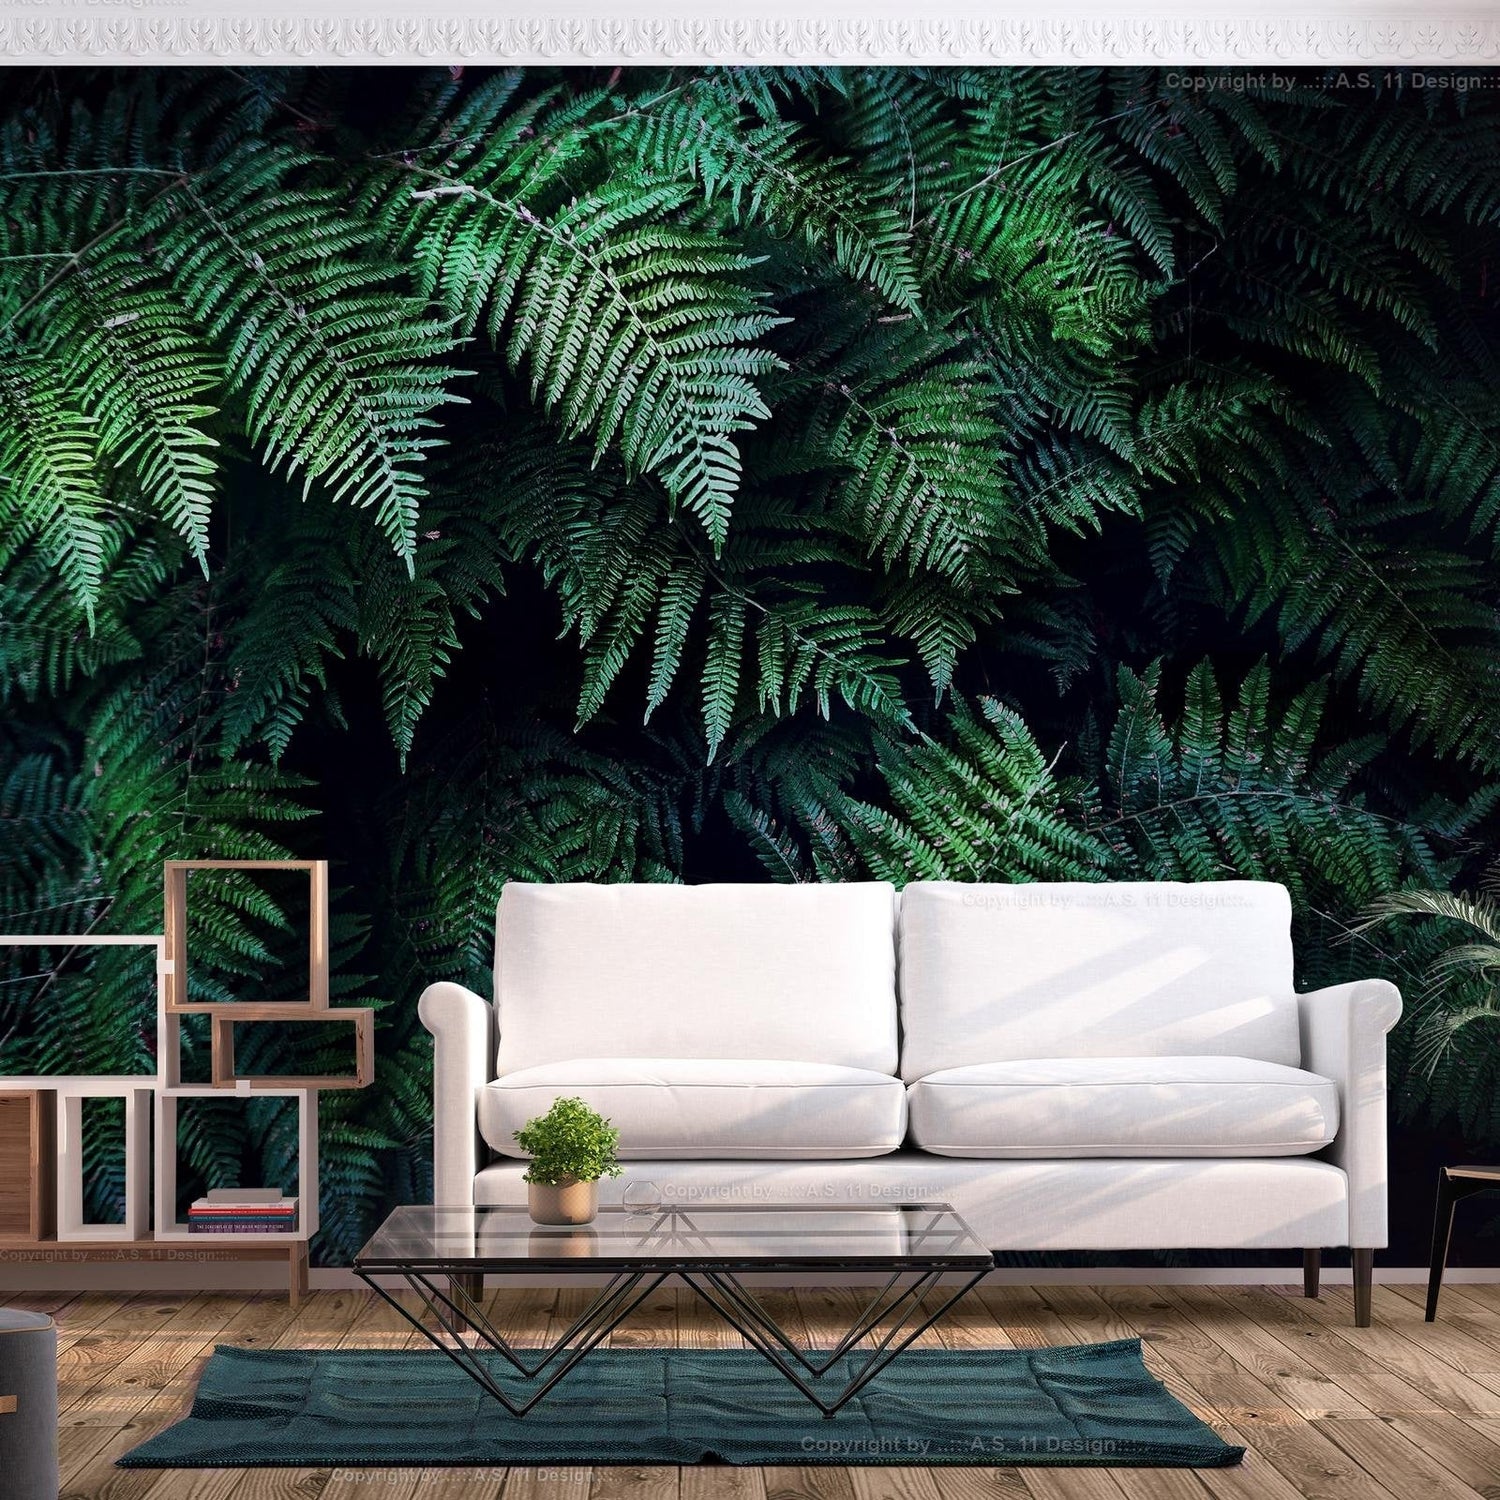 Peel and stick wall mural - In the Thicket-TipTopHomeDecor